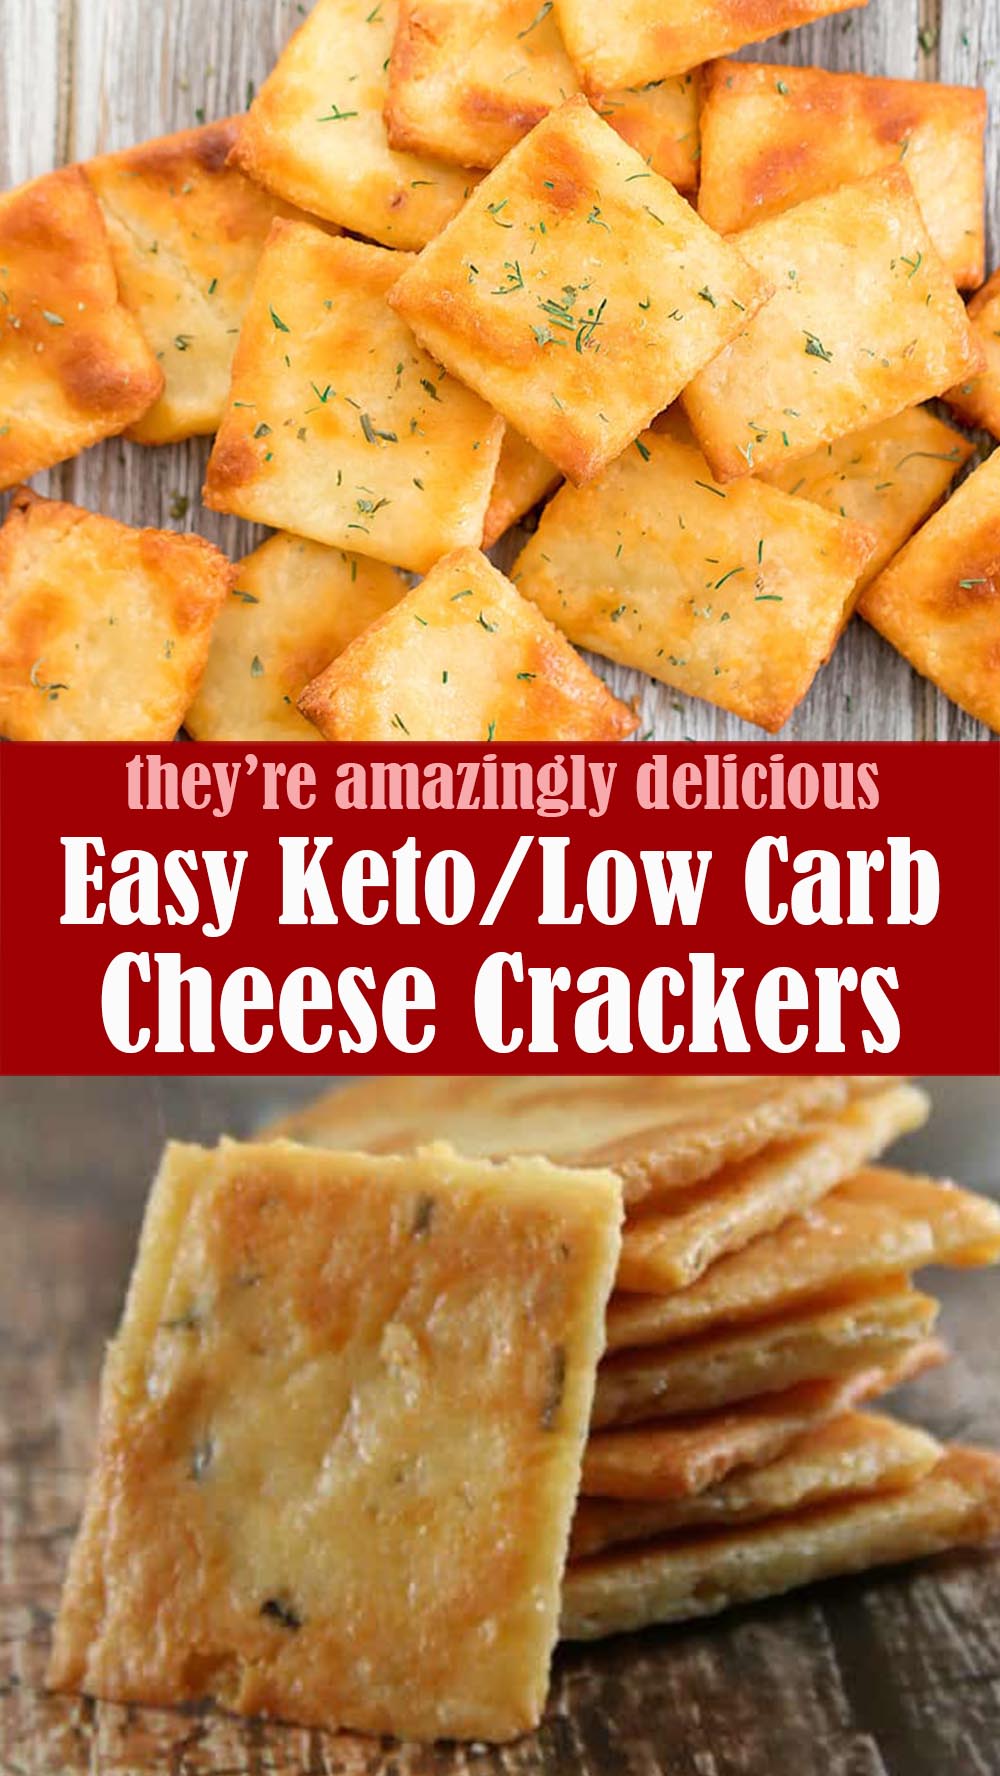 Easy Low Carb Cheese Crackers